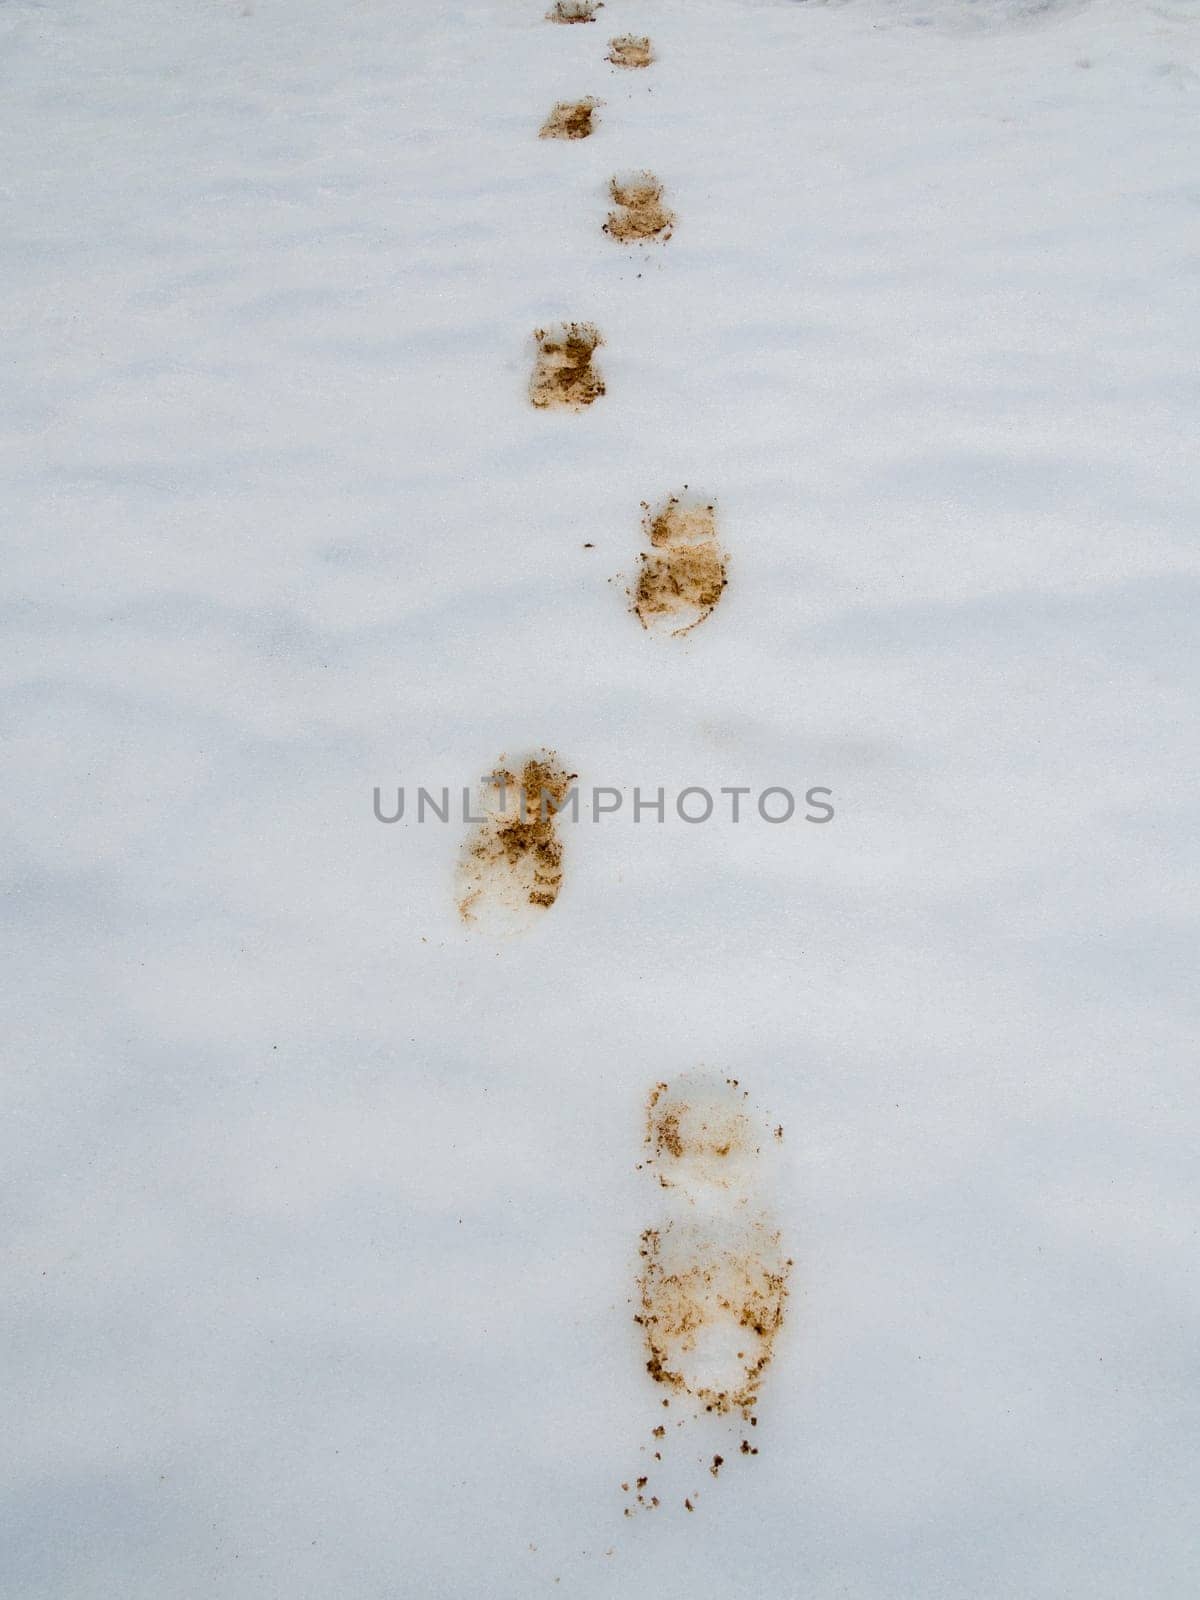 dirty mud footprint on a virgin white snow surface winter by Andre1ns